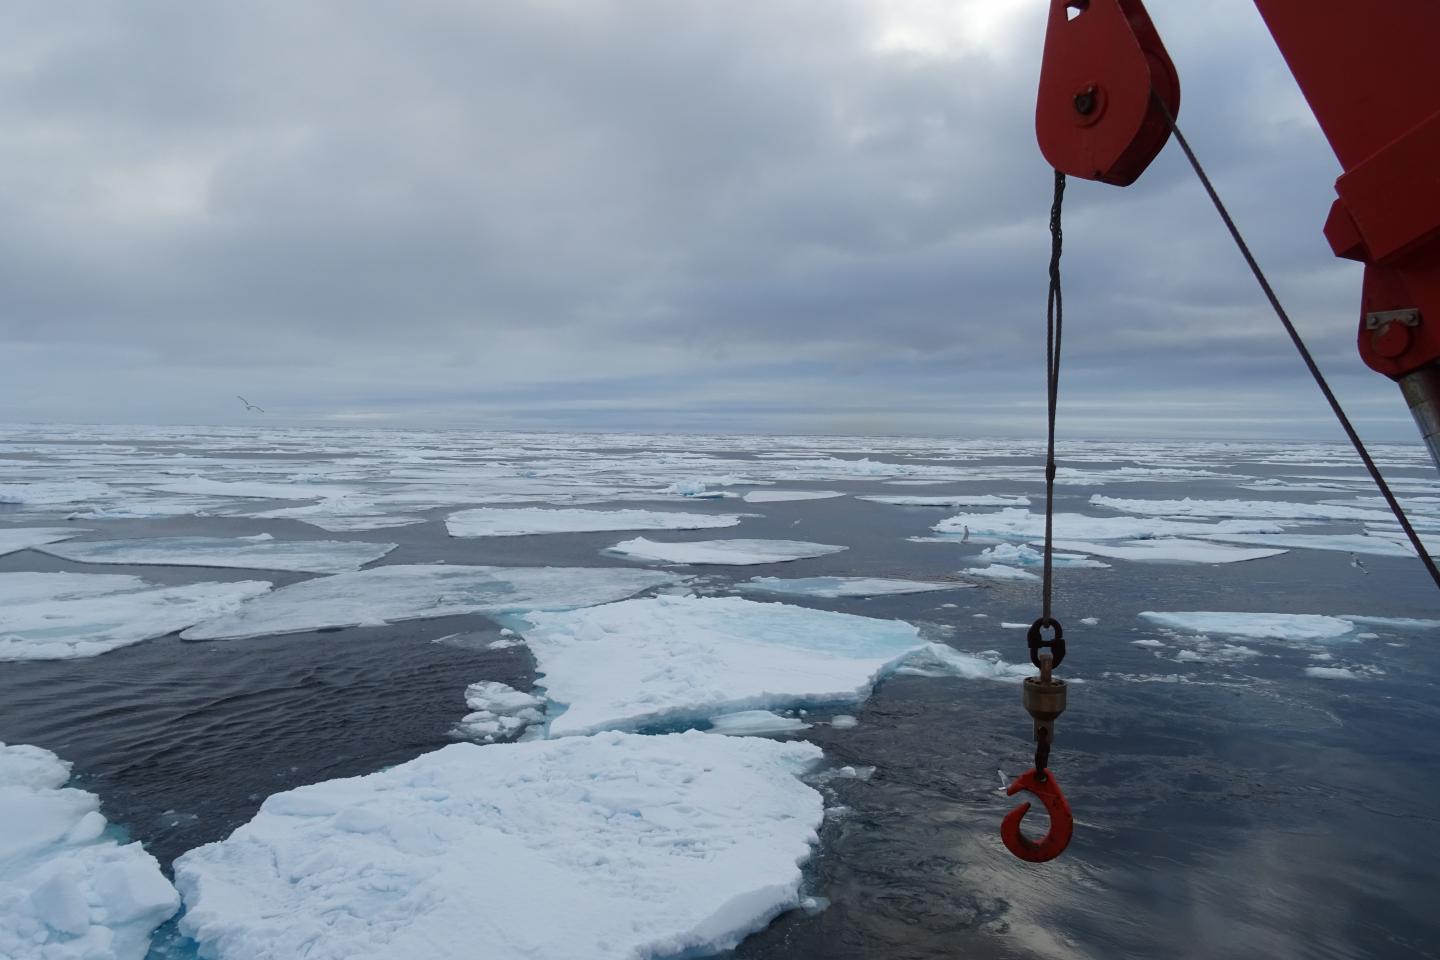 Newer PFAS Compound Detected for First Time in Arctic Seawater